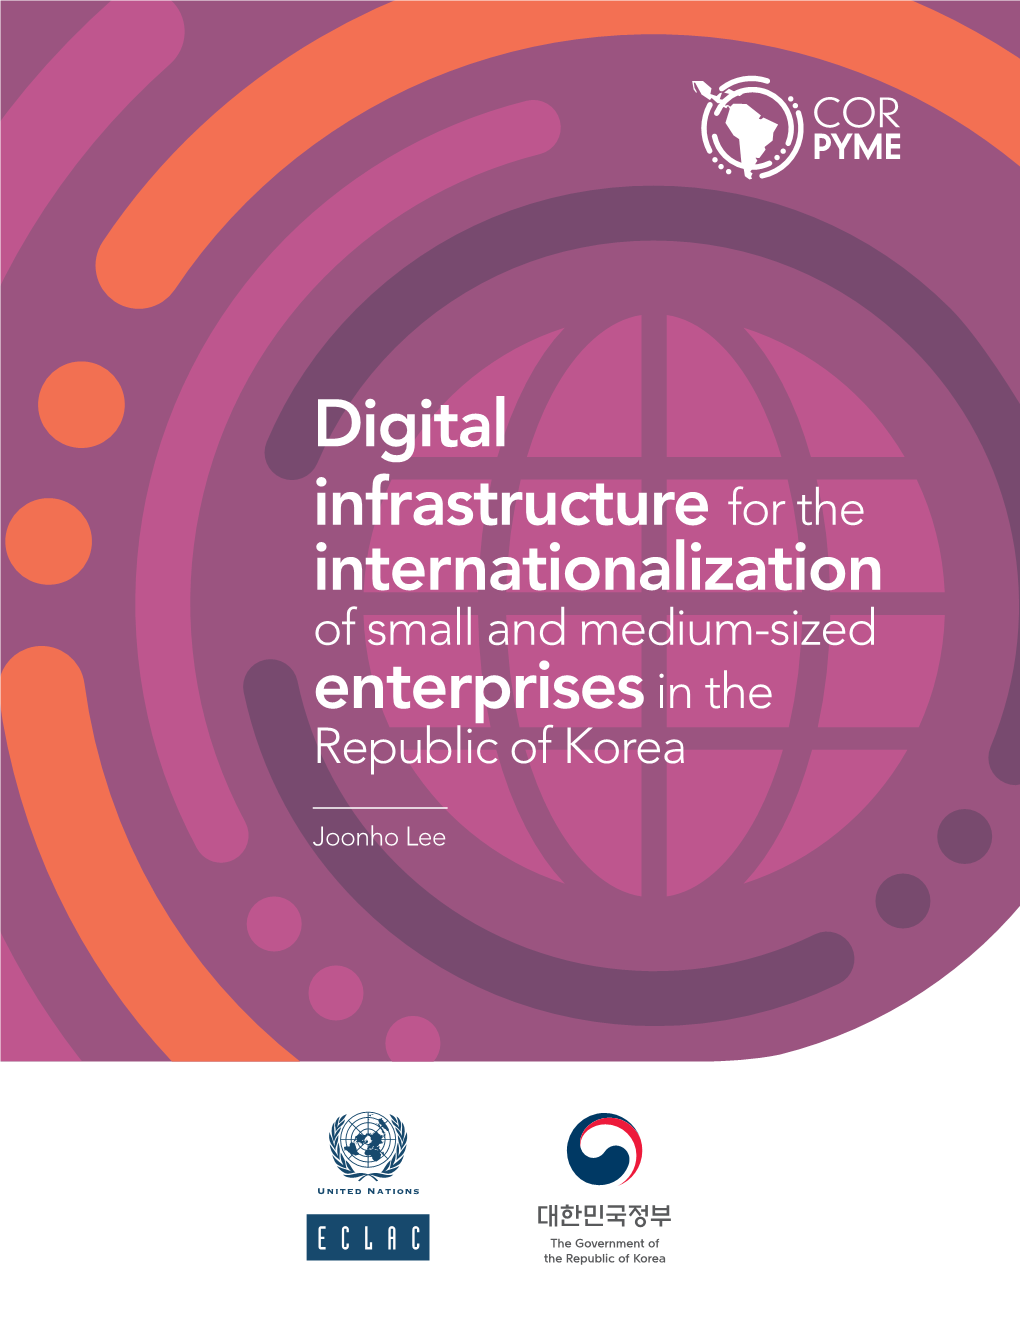 Digital Infrastructure for the Internationalization of Small and Medium-Sized Enterprises in the Republic of Korea